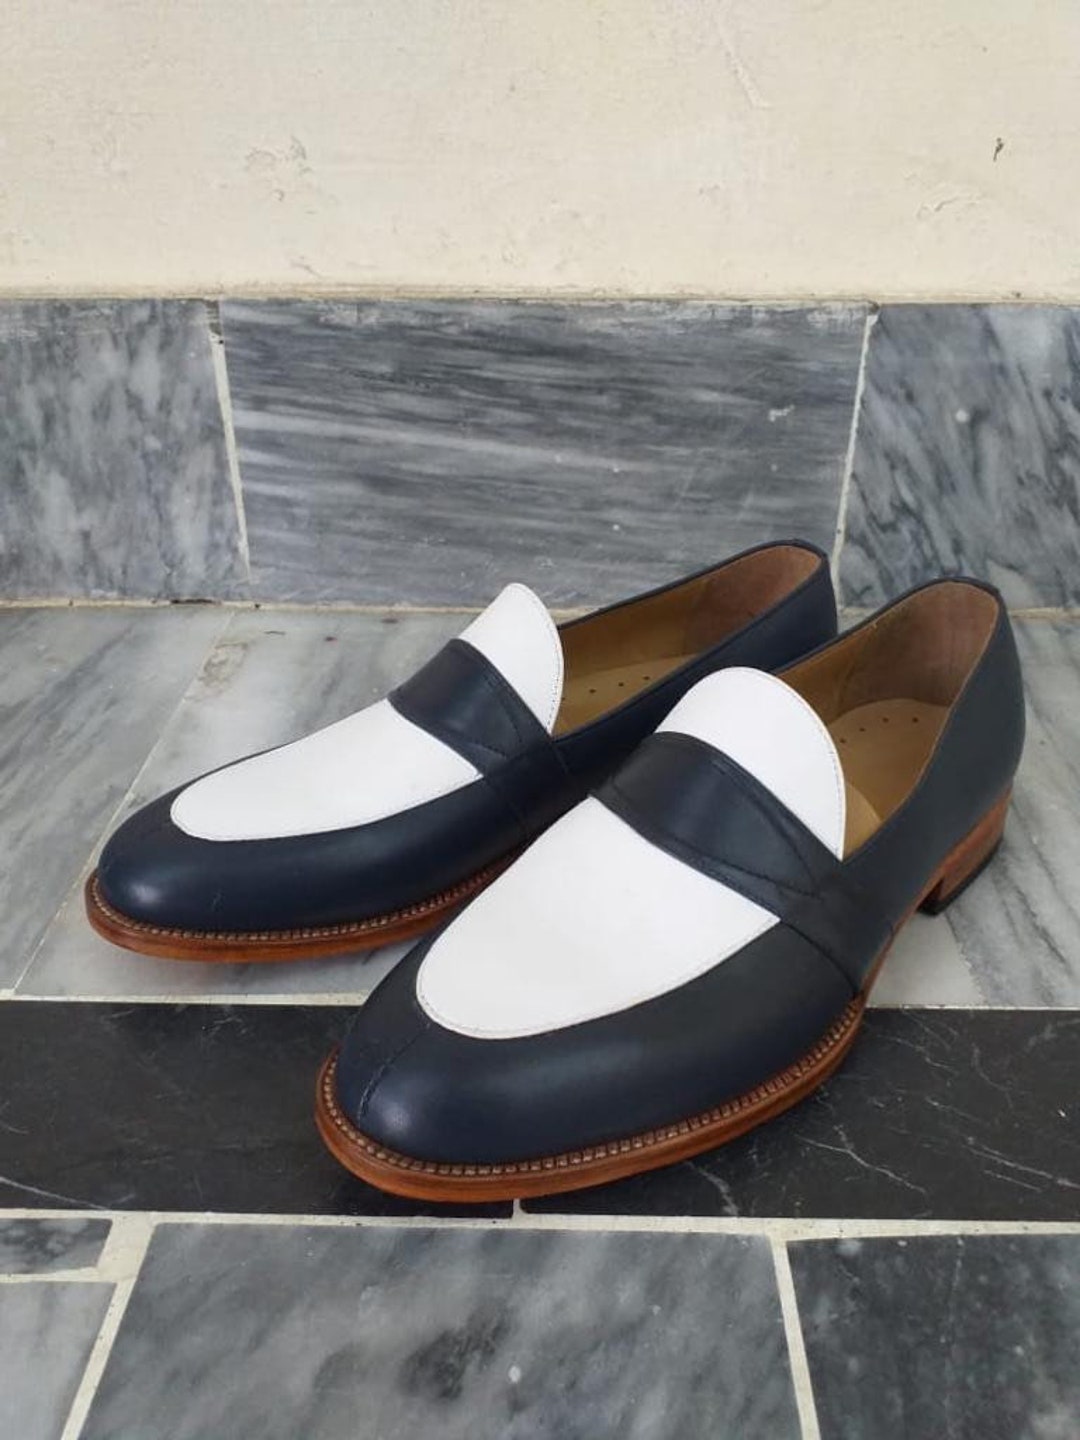 Mens Handmade Geninue Two Tone Black and White Leather Shoes - Etsy